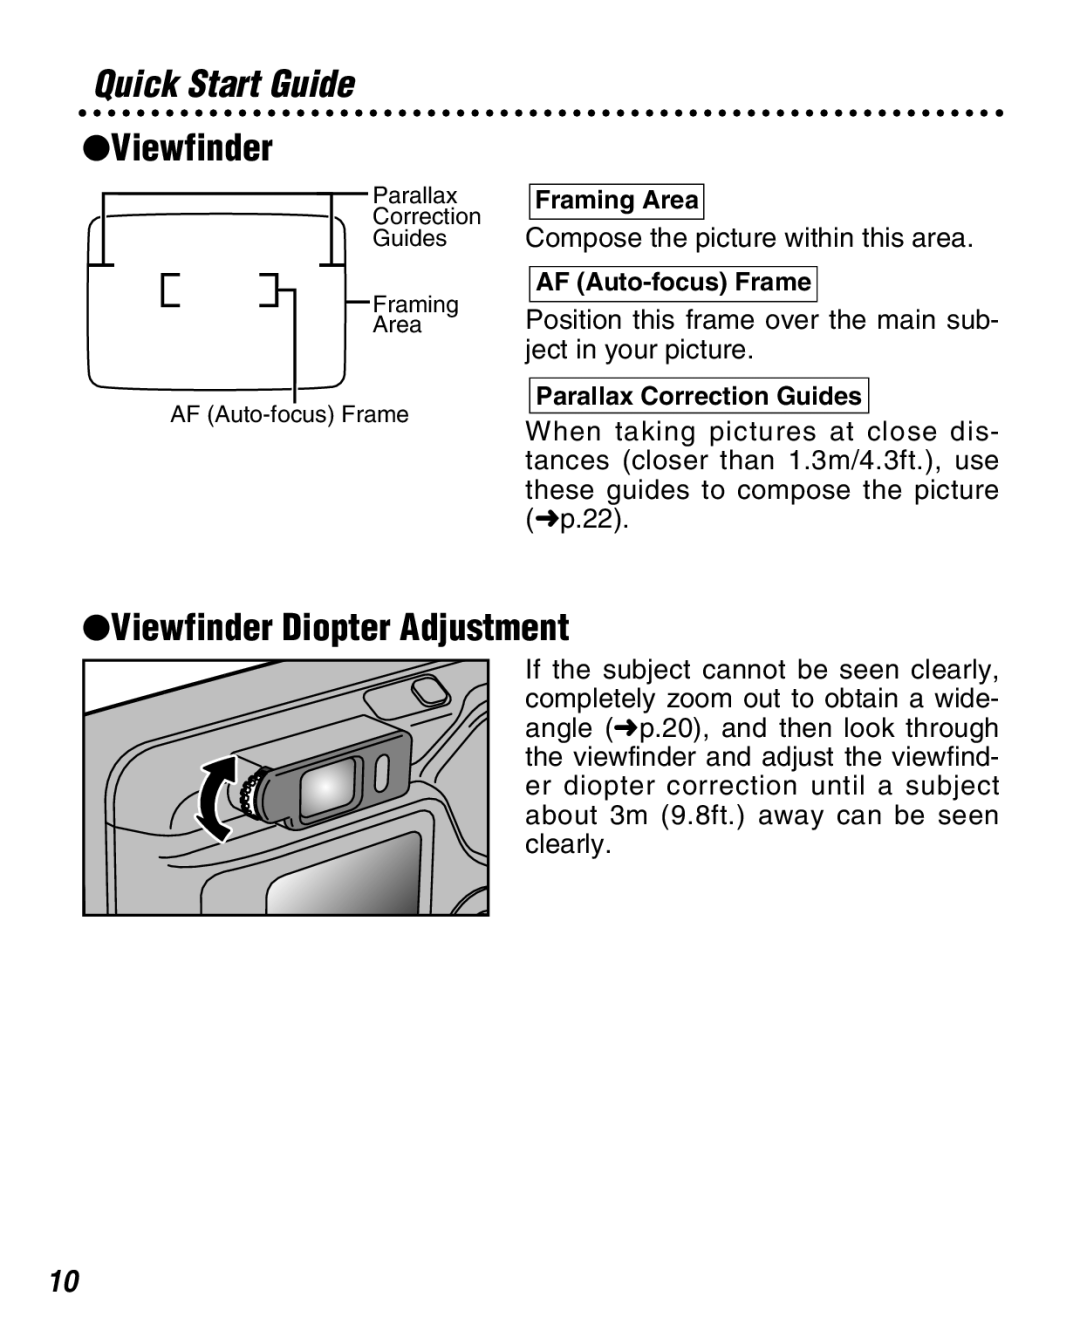 FujiFilm Zoom Date 160ez owner manual Quick Start Guide, Viewfinder Diopter Adjustment 